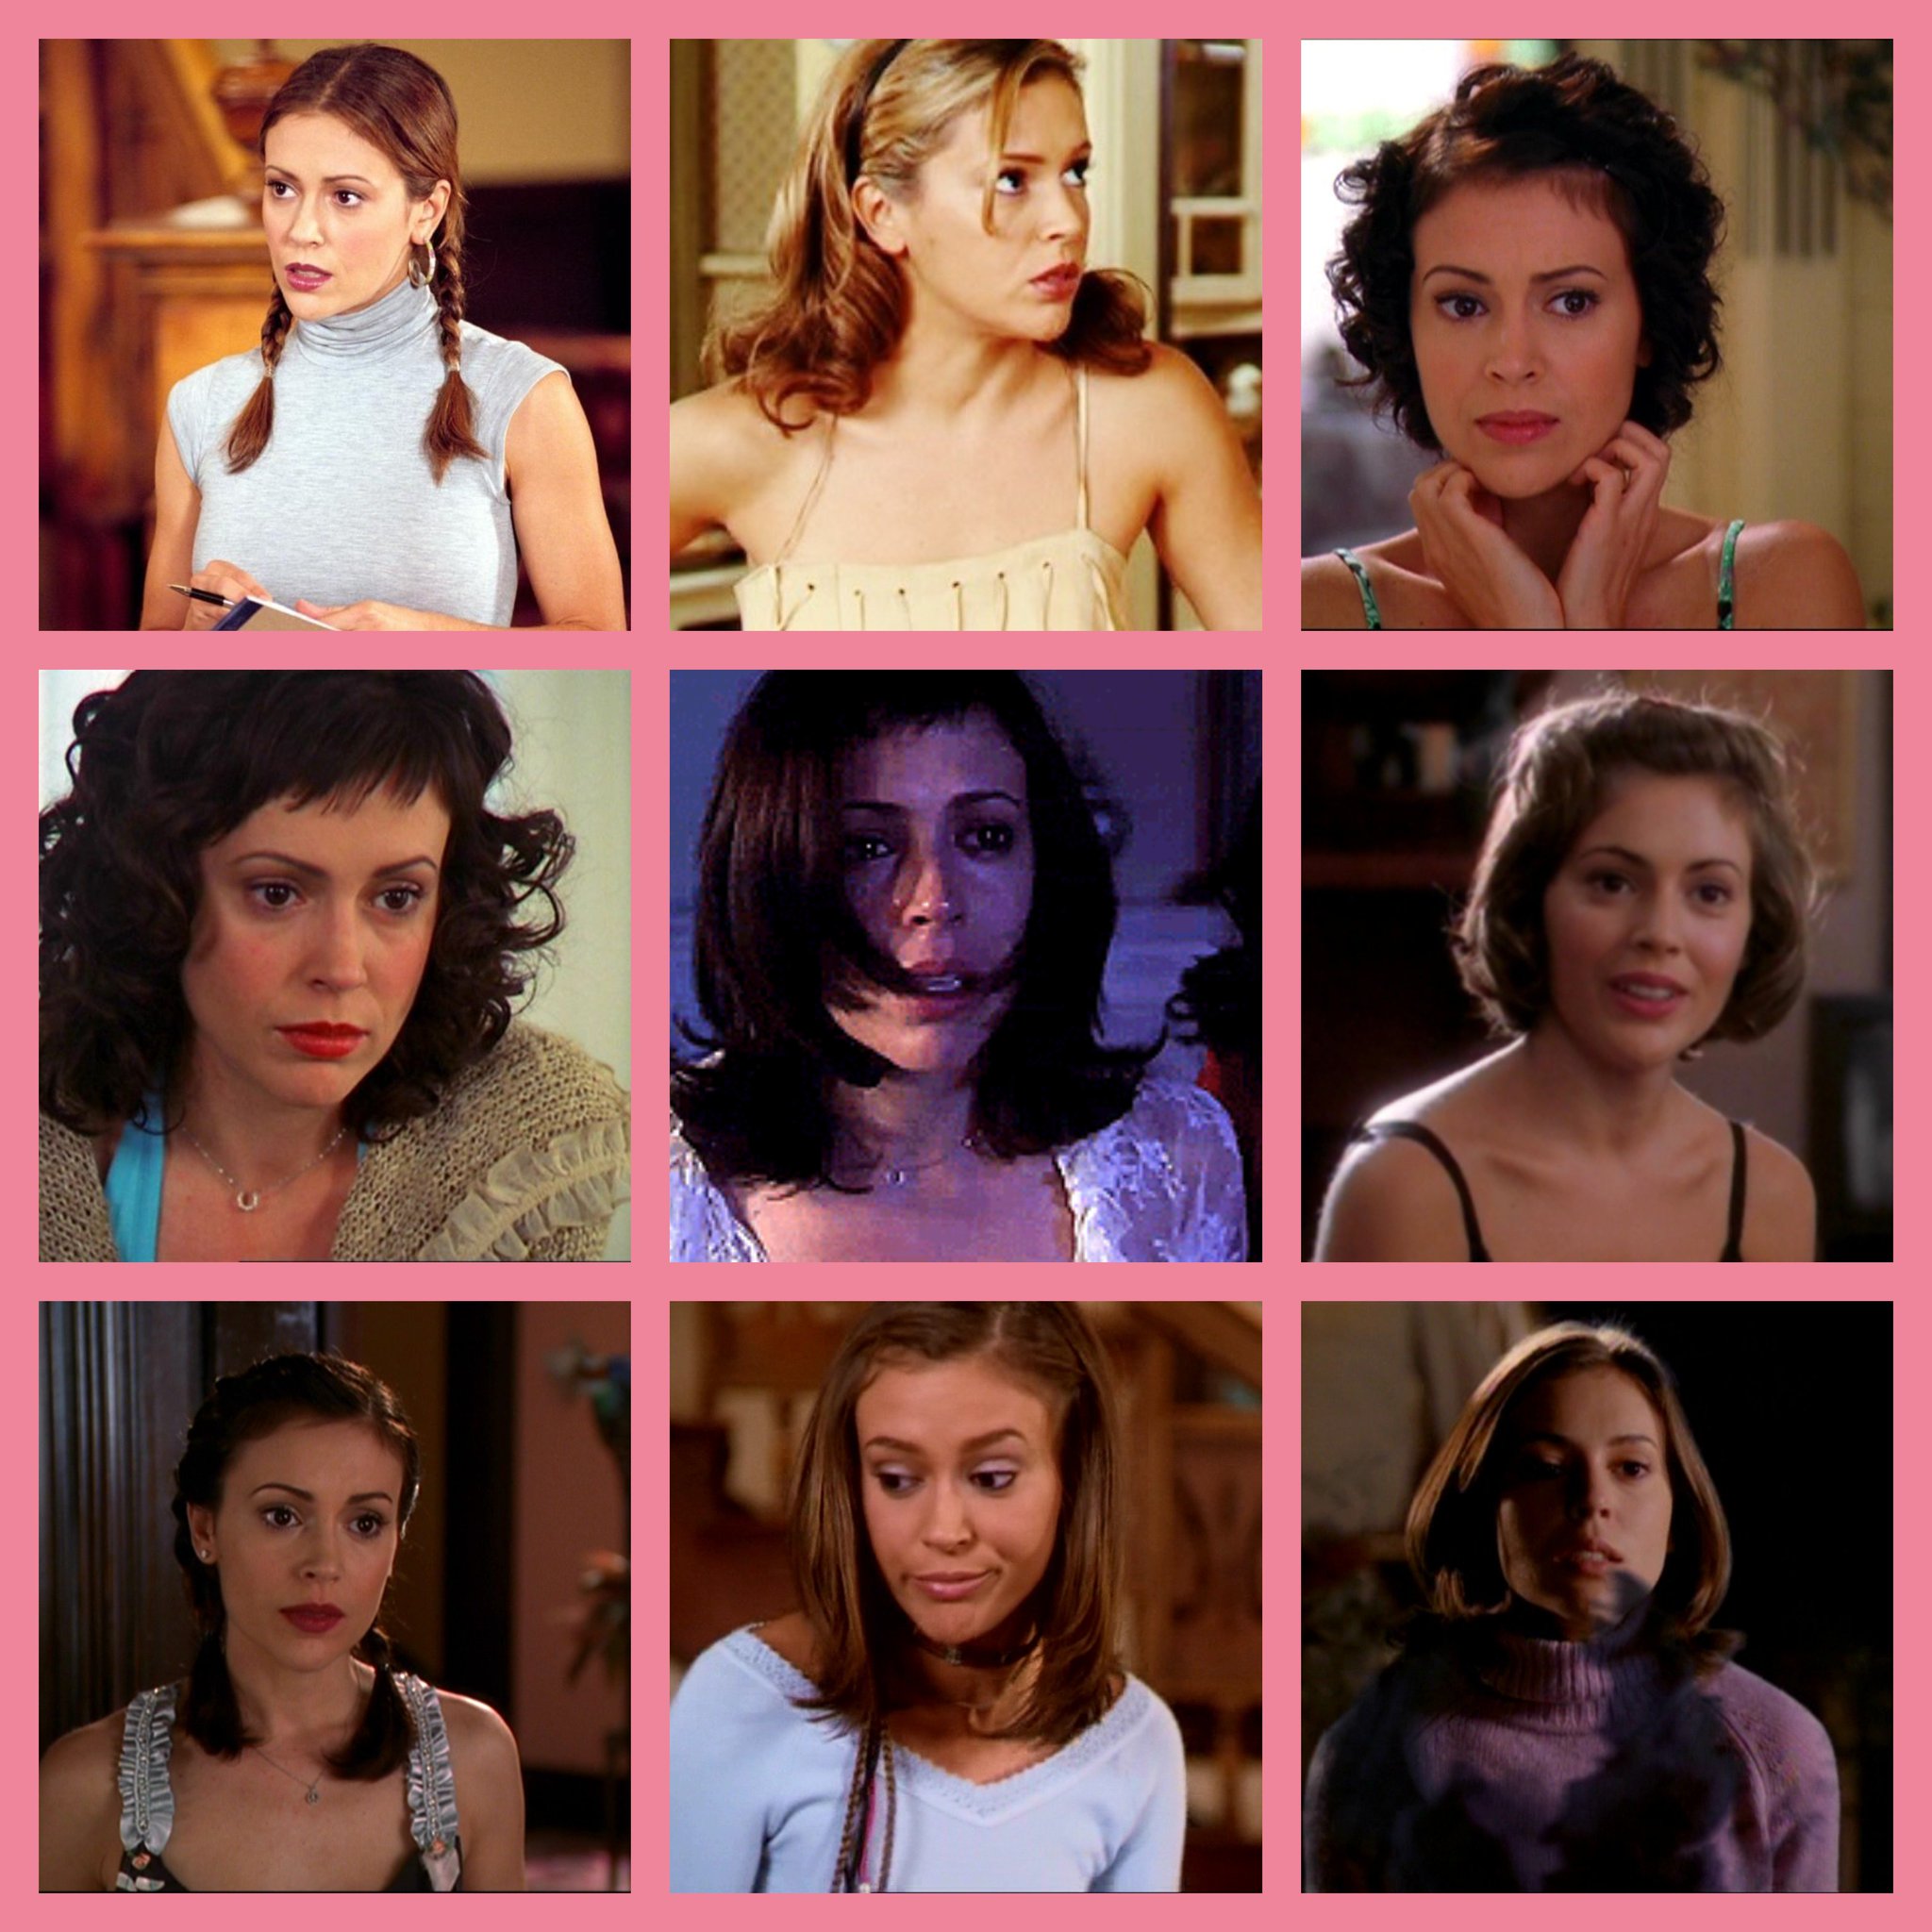 “Day 12 - Phoebe Halliwell (Charmed) played by Alyssa Milano
&#...